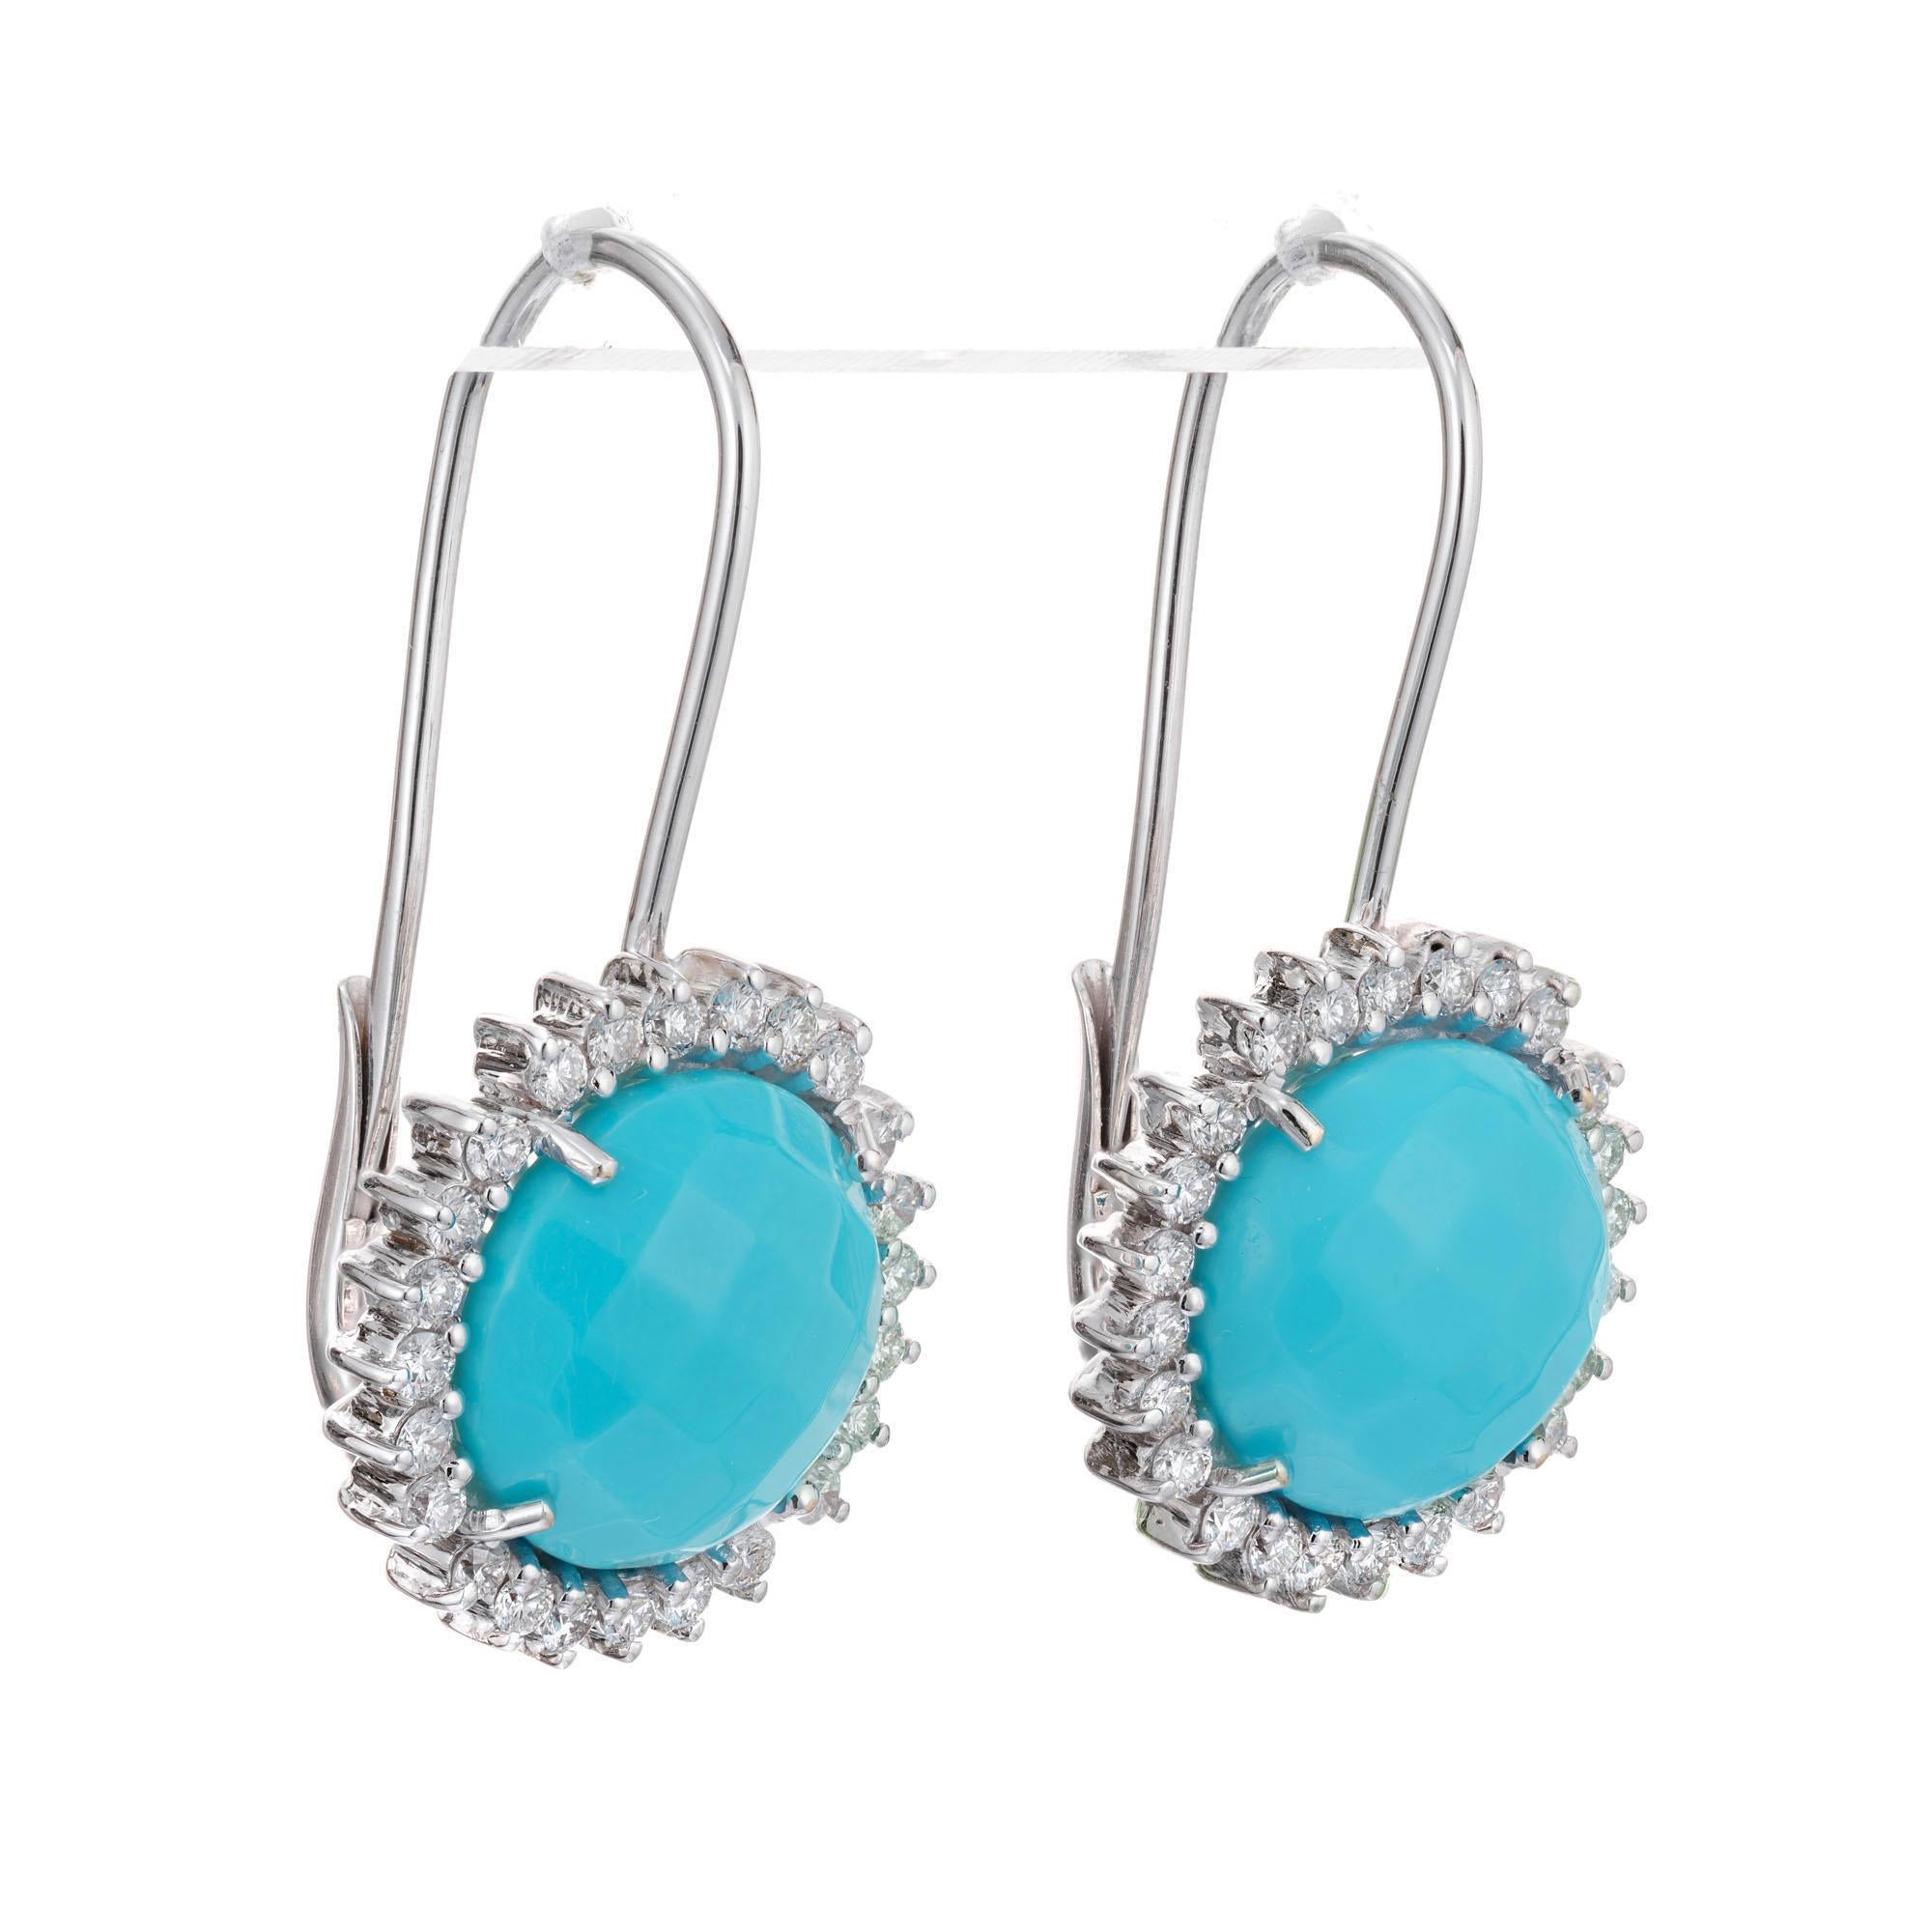 Turquoise and diamond halo dangle earrings. Cabochon turquoise in 18k white gold settings with diamond halos. Long top wires with clip backs.

48 round full cut diamonds, approx. total weight .92cts, G, SI1
2 round Turquoise, 12mm- 12.15mm
18k white